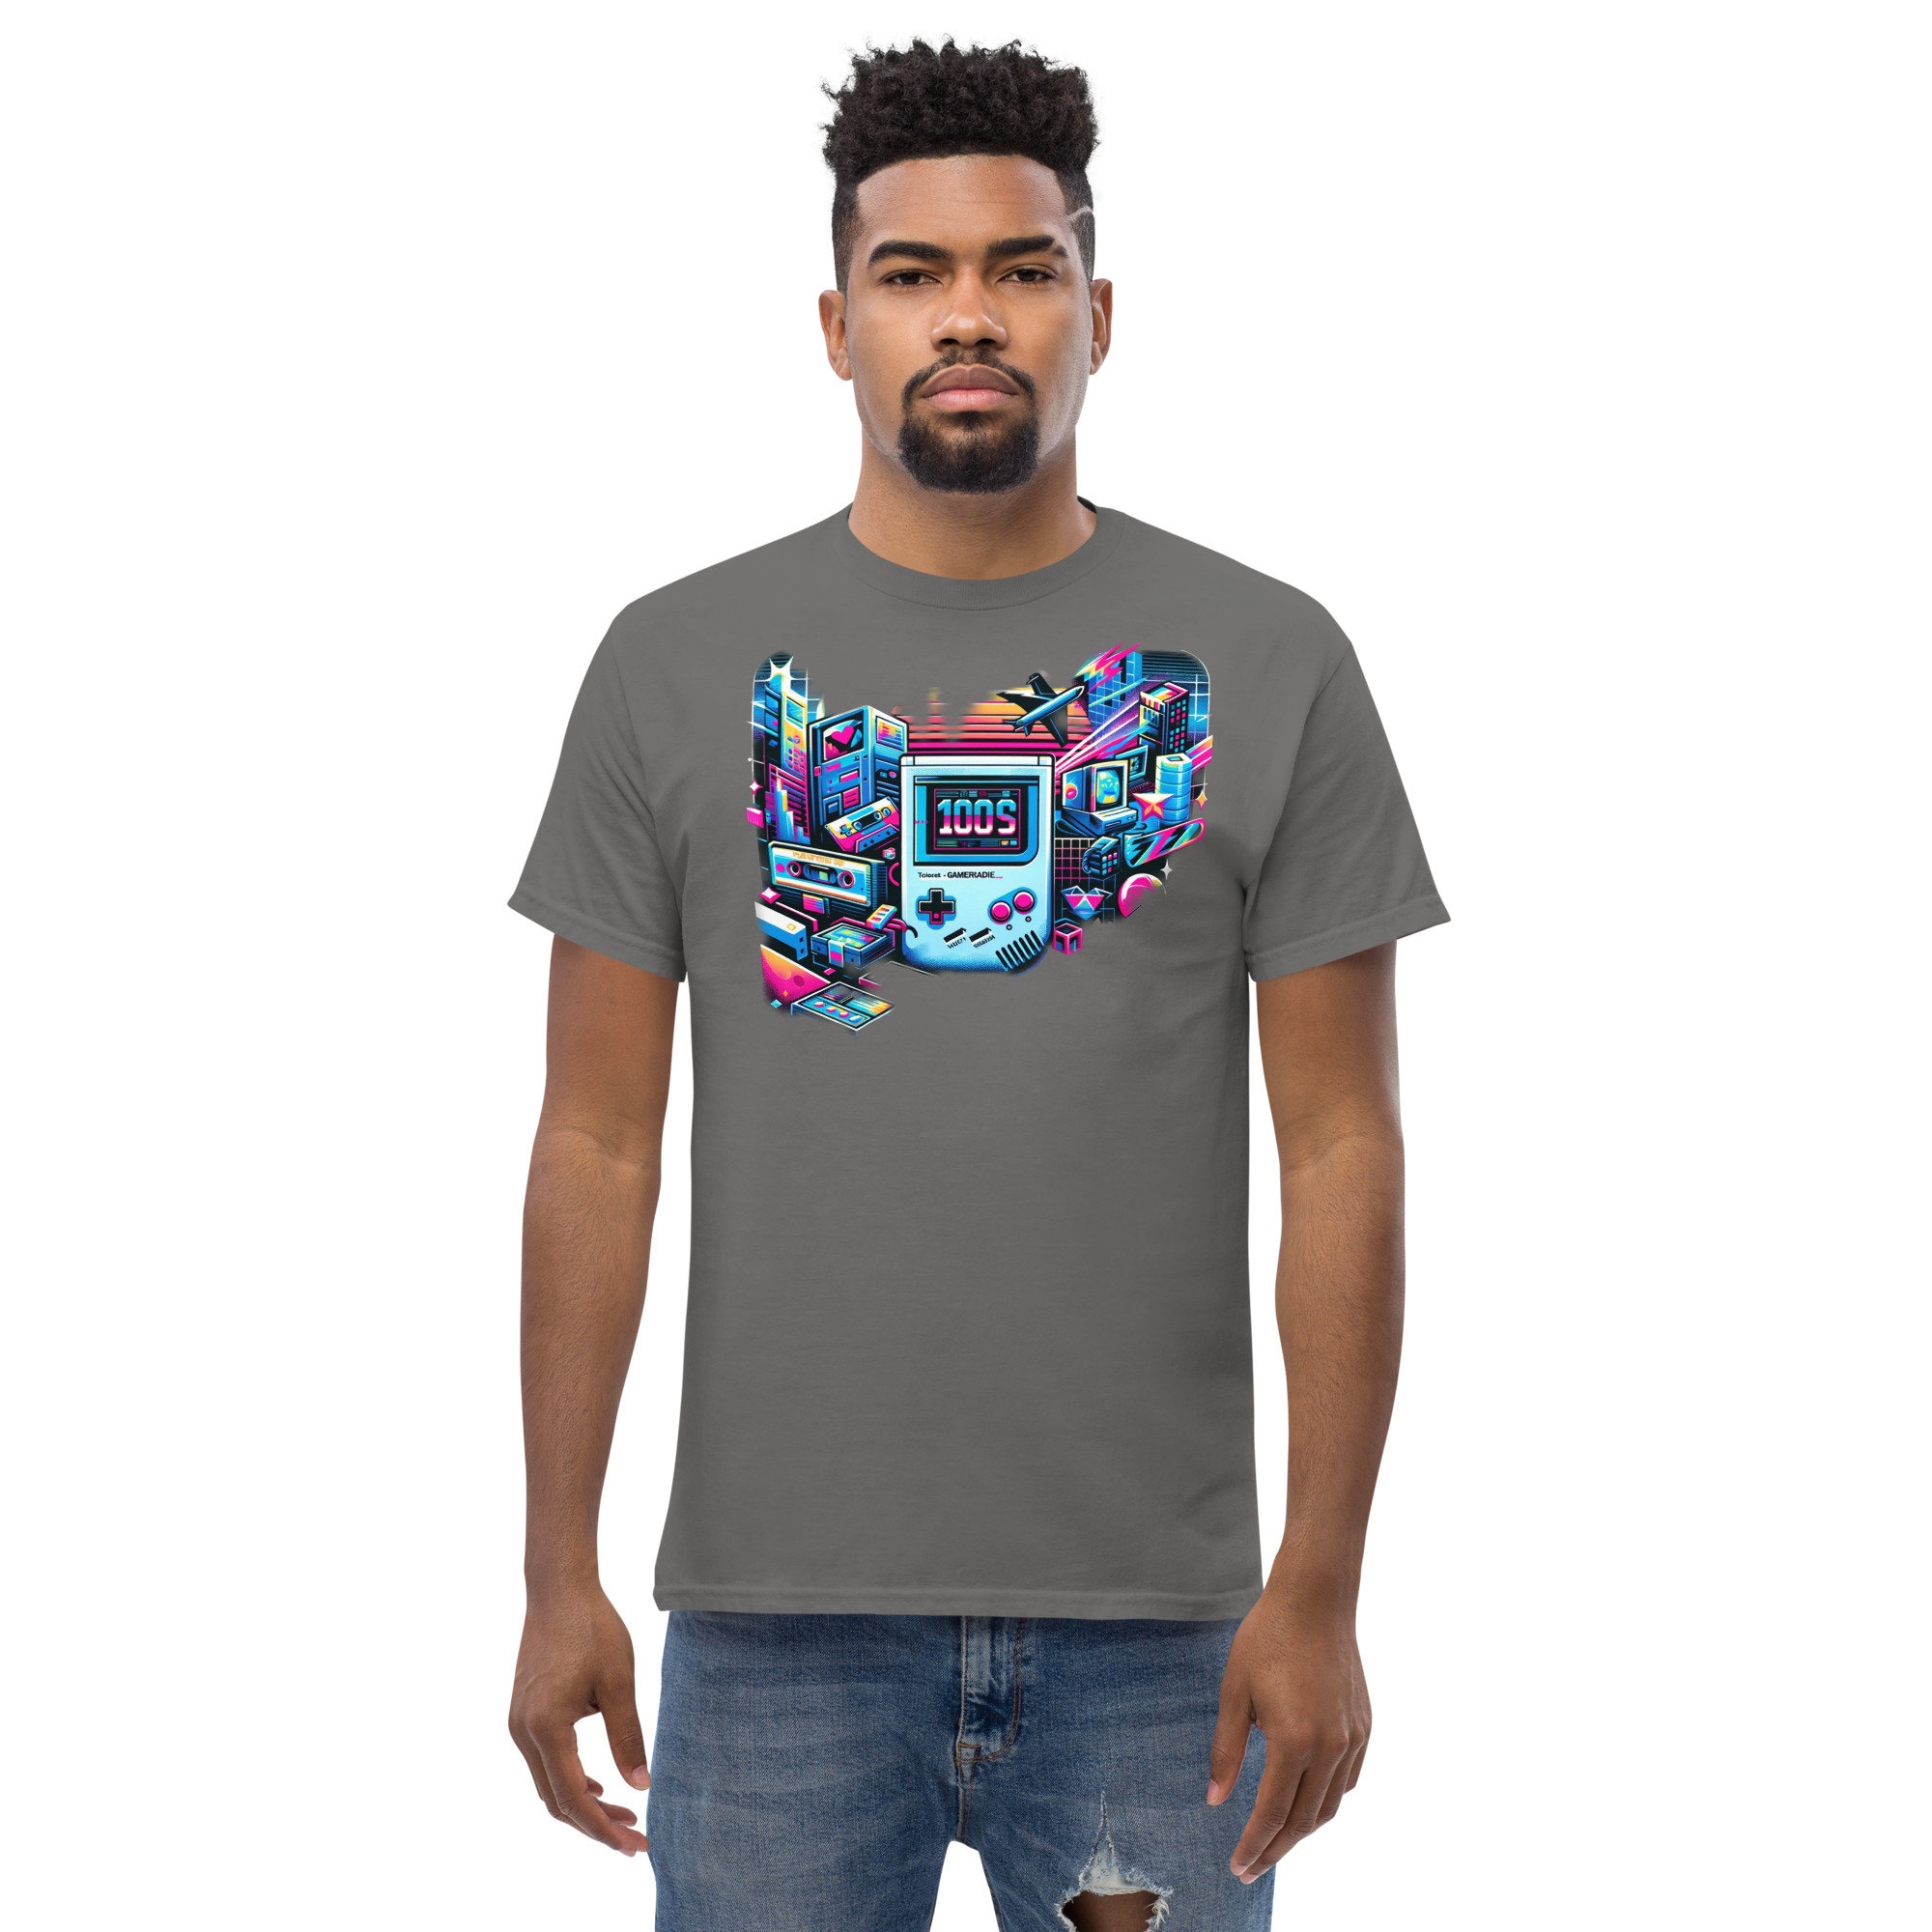 Shop Gaming Merch at Game Culture Company - Your Game. Your Style.